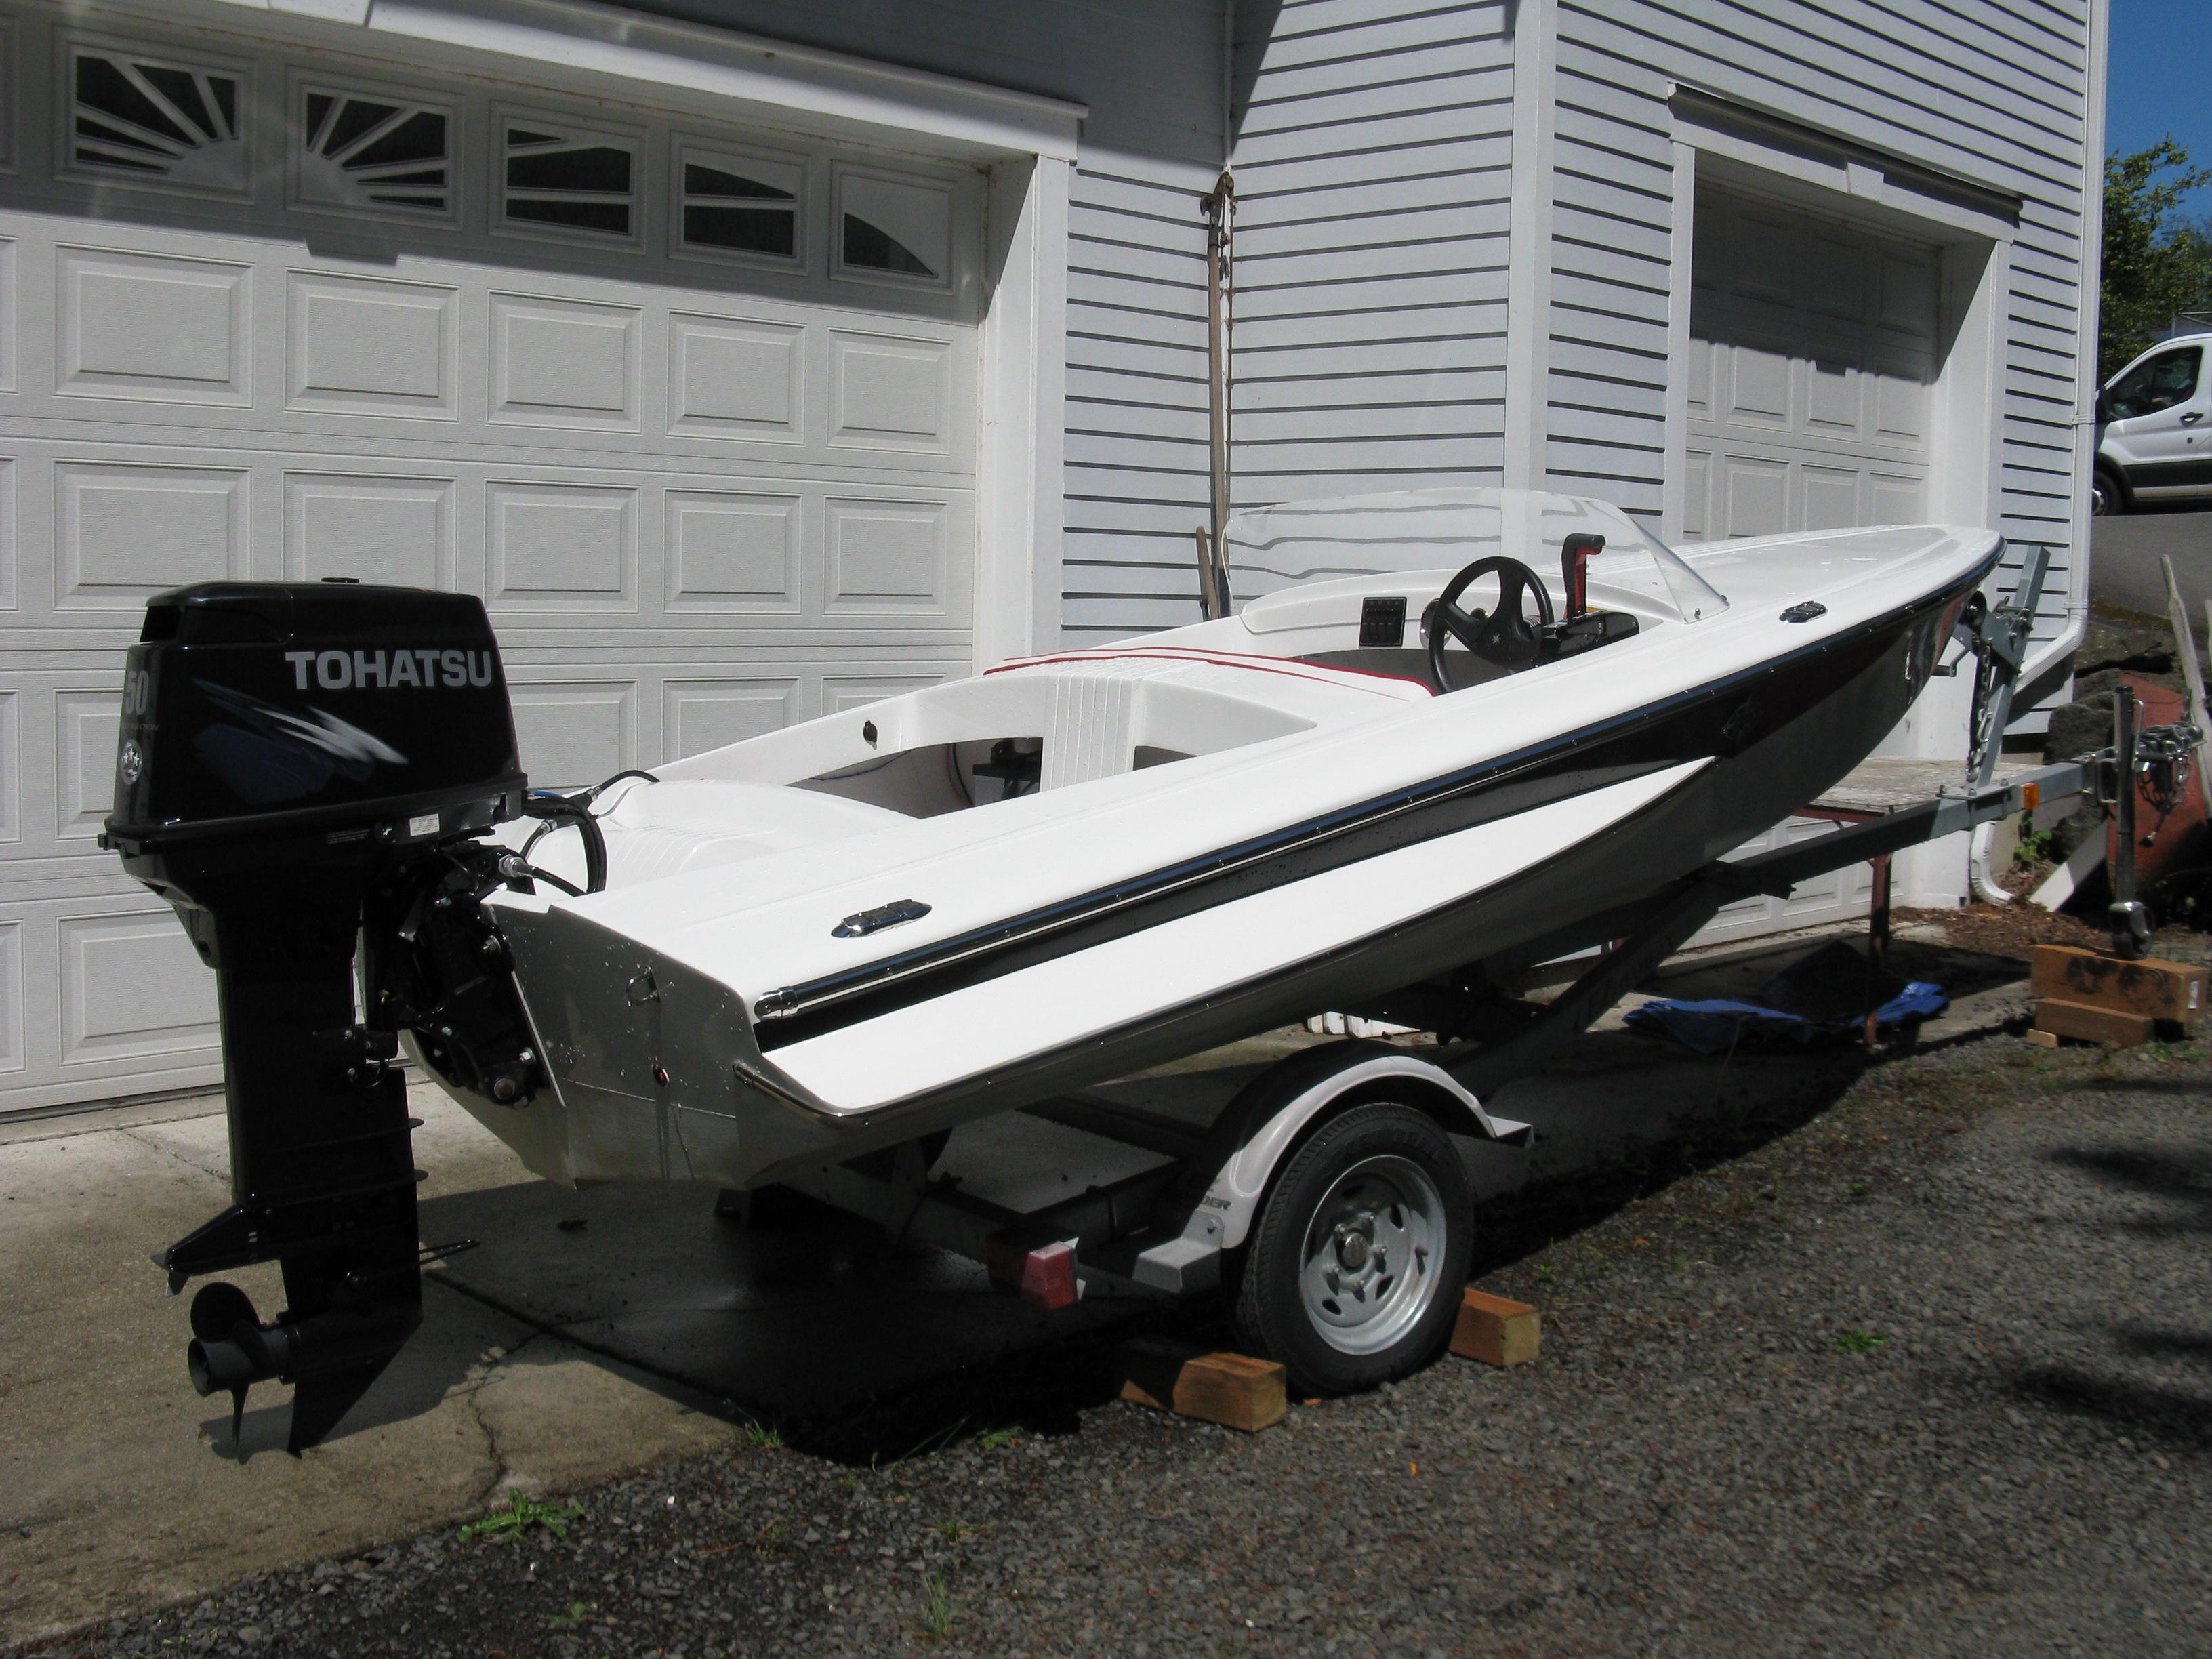 Bass Boats for Sale in Kingston, ON - Page 1 of 2 